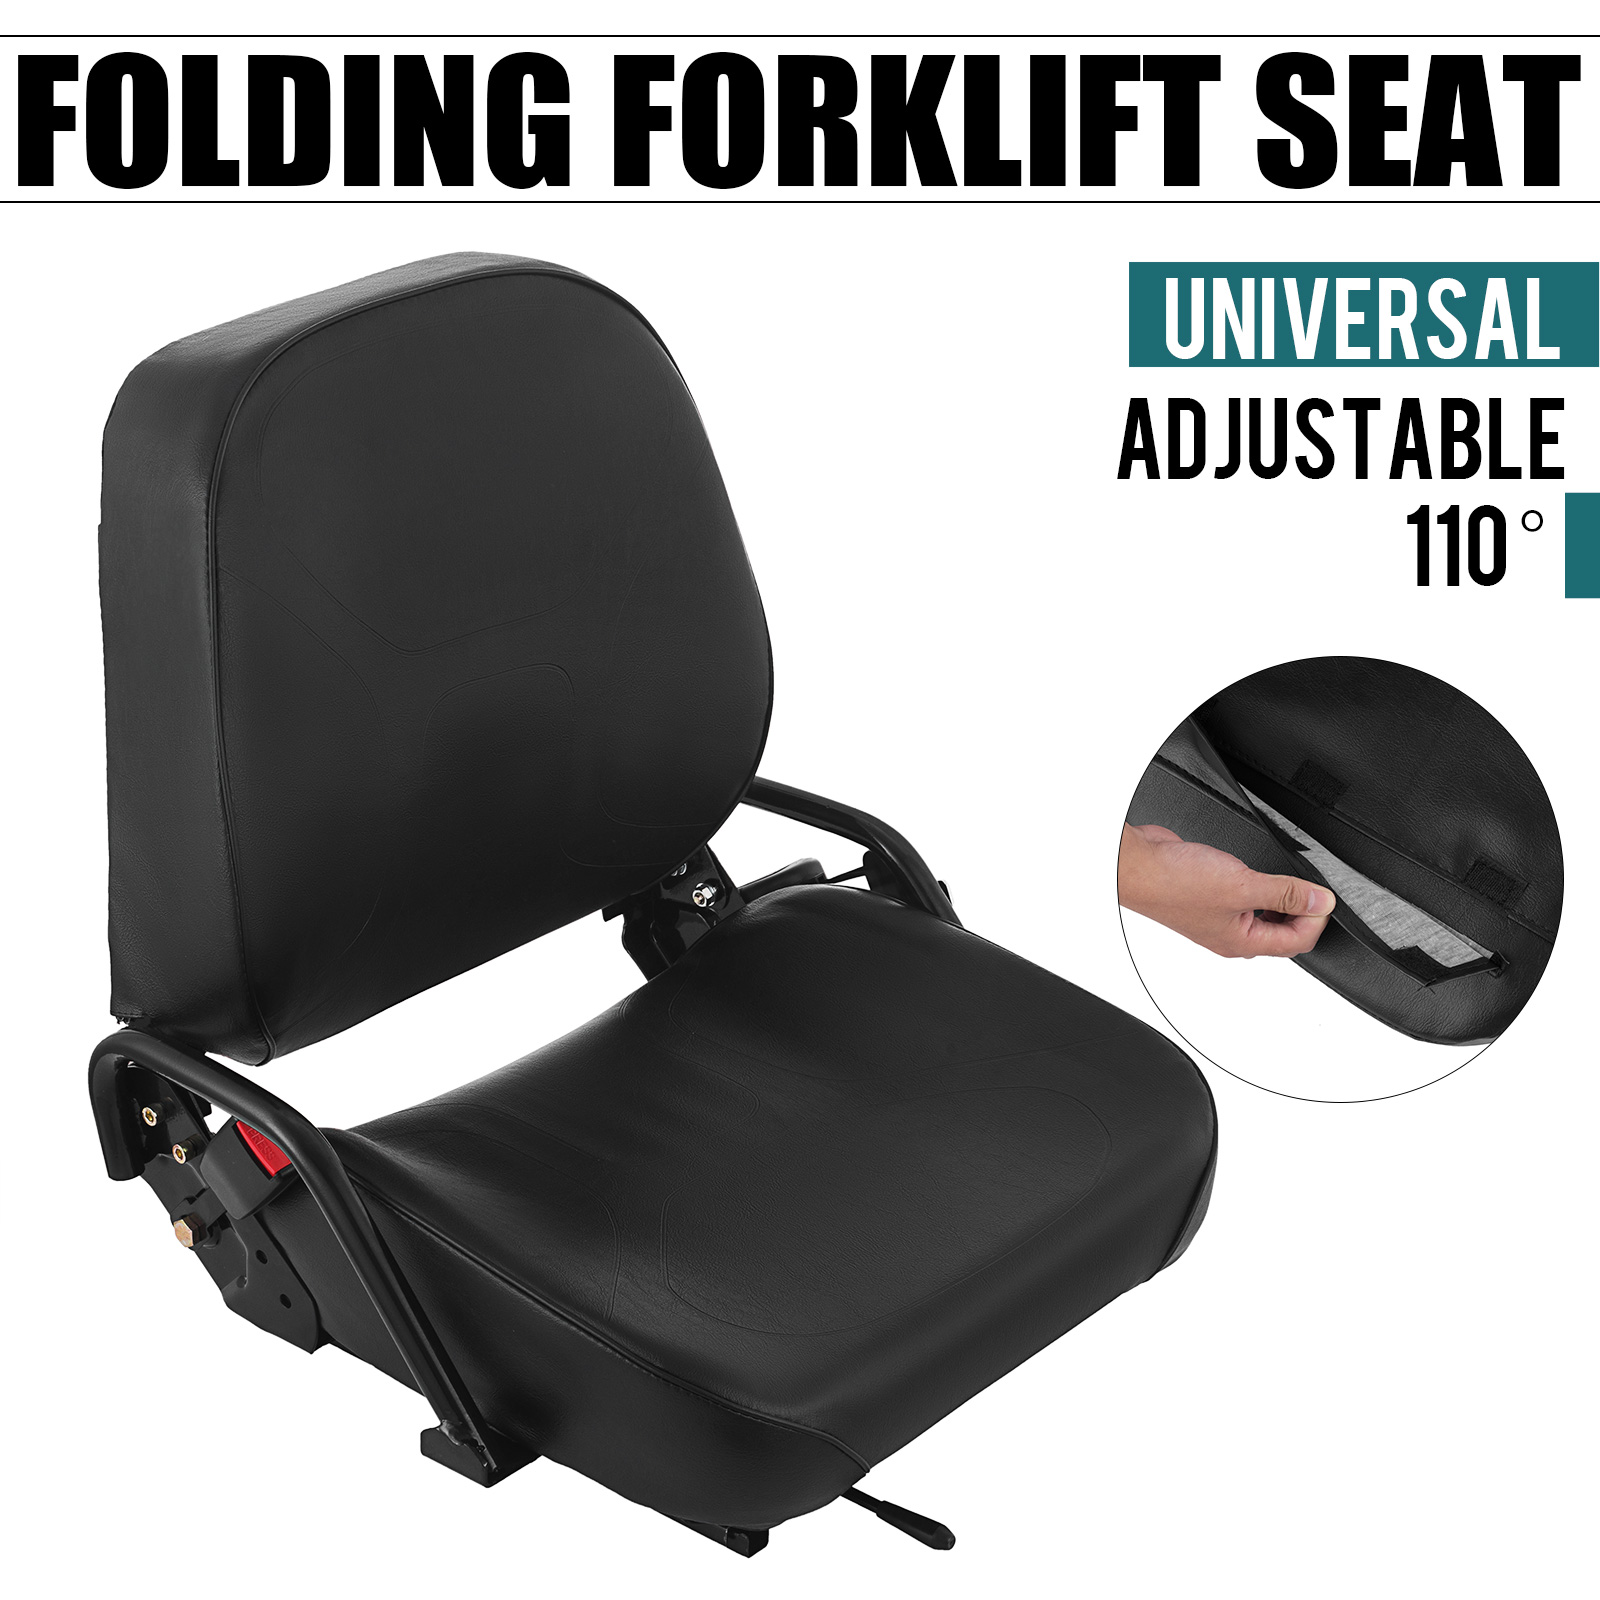 New Universal Vinyl Forklift Seat Fits Clark Cat Hyster Yale Toyota Mitsubishi Business Industrial Material Handling